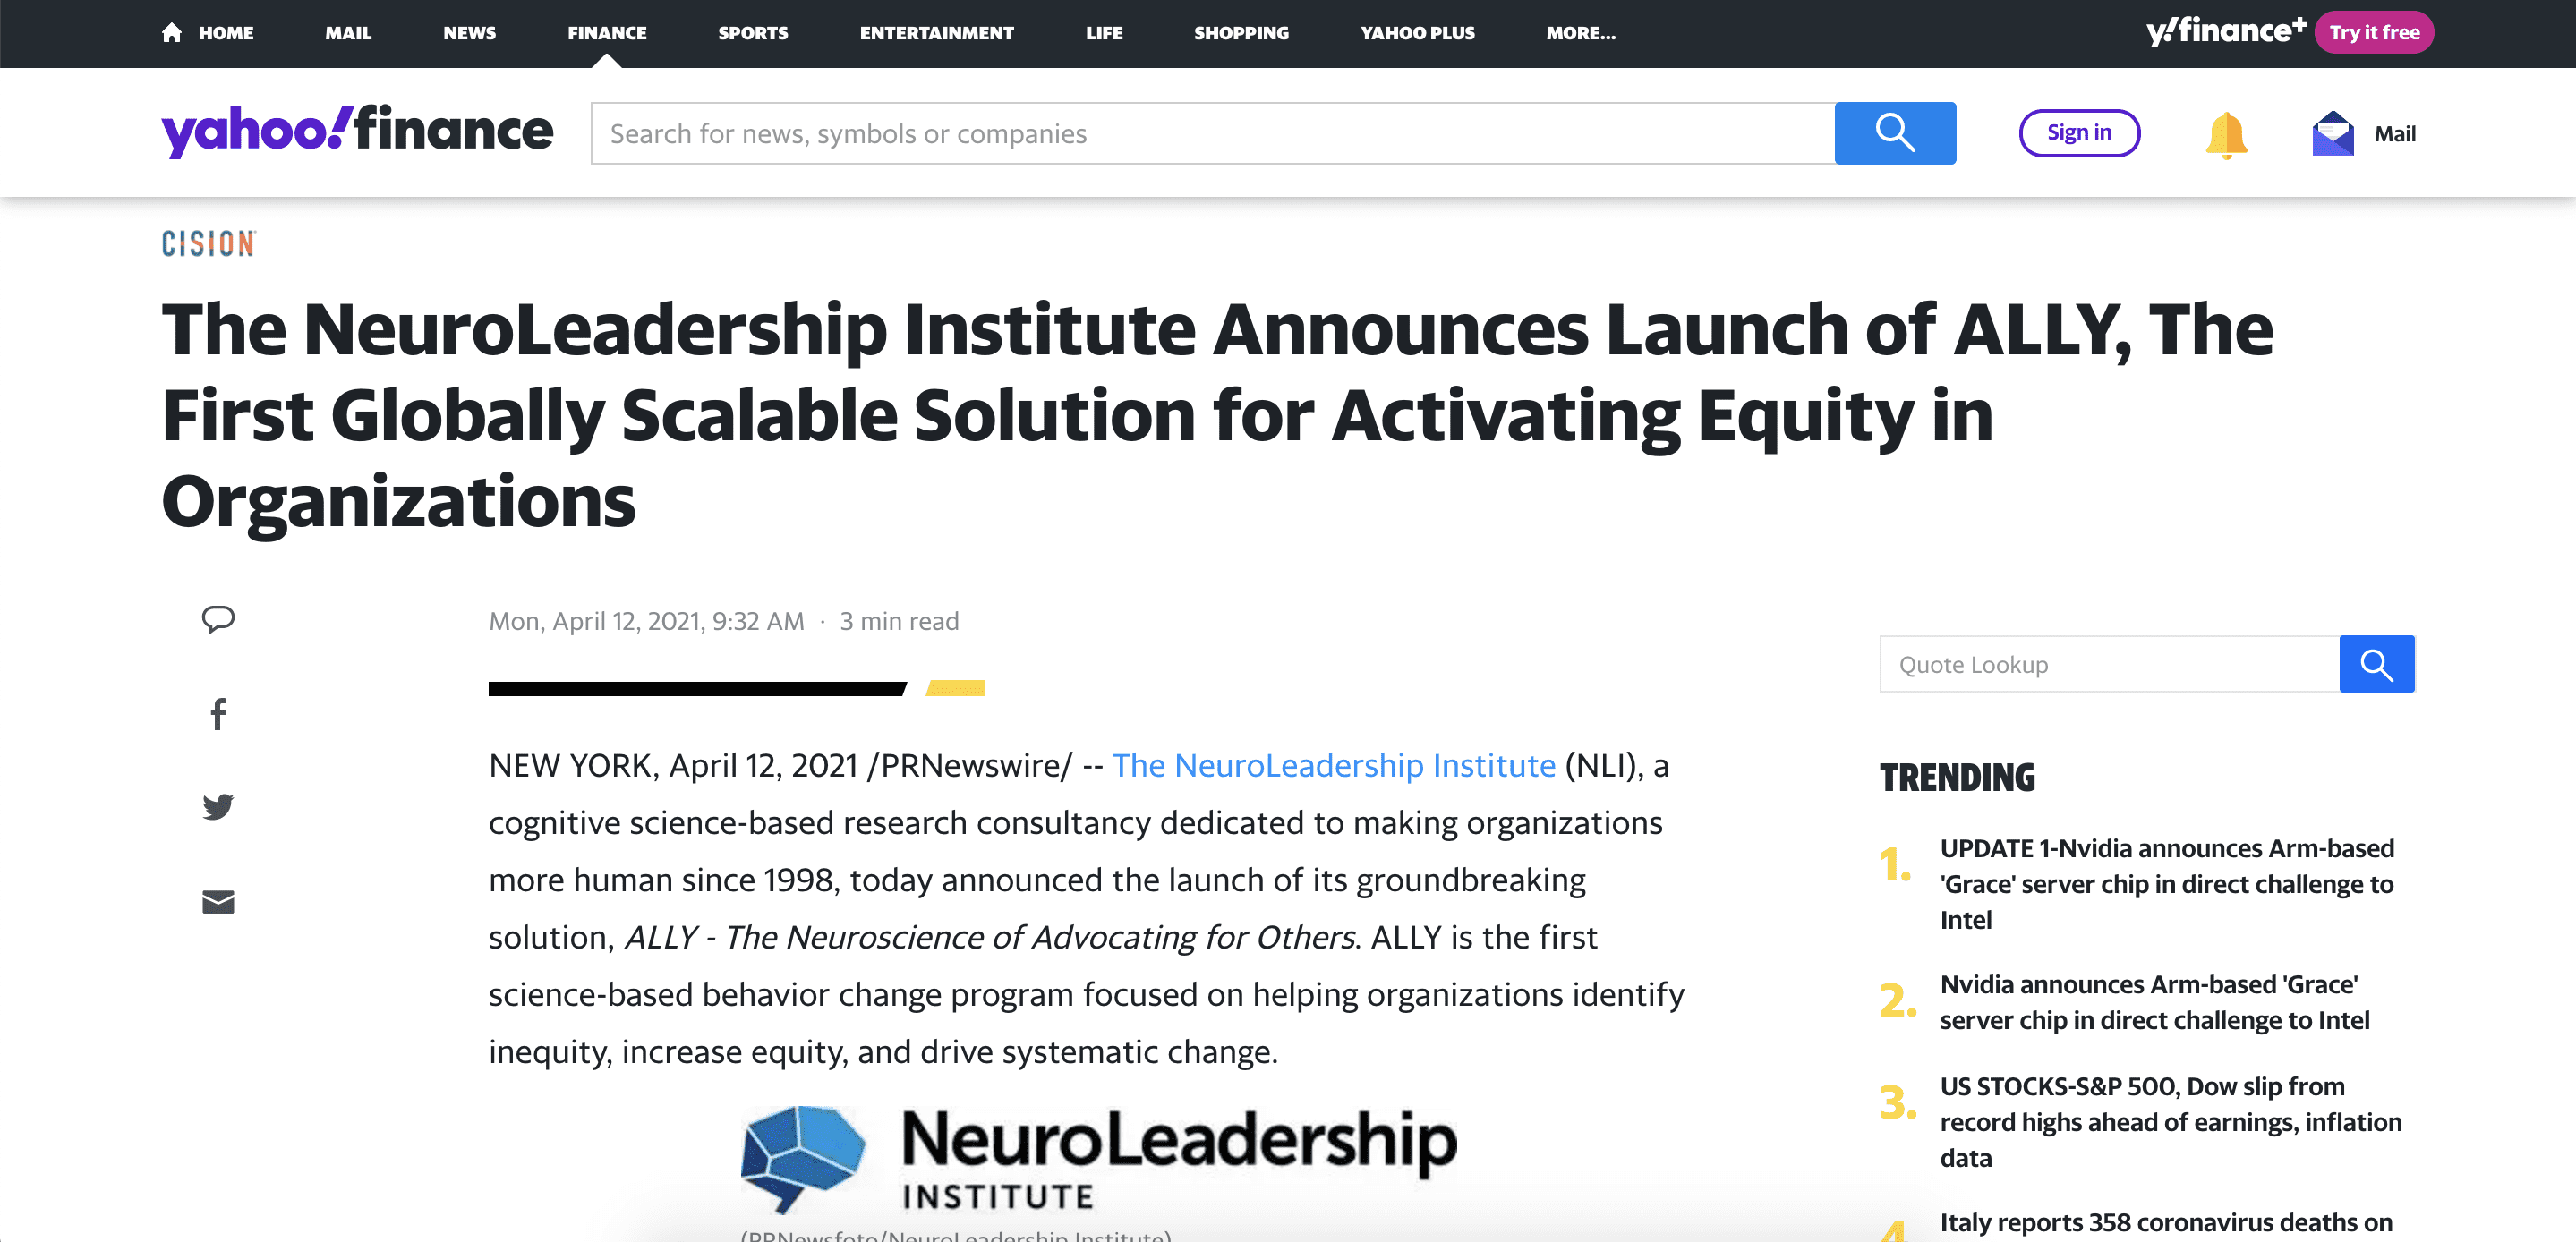 Yahoo! Finance: The NeuroLeadership Institute Announces Launch of ALLY, The First Globally Scalable Solution for Activating Equity in Organizations